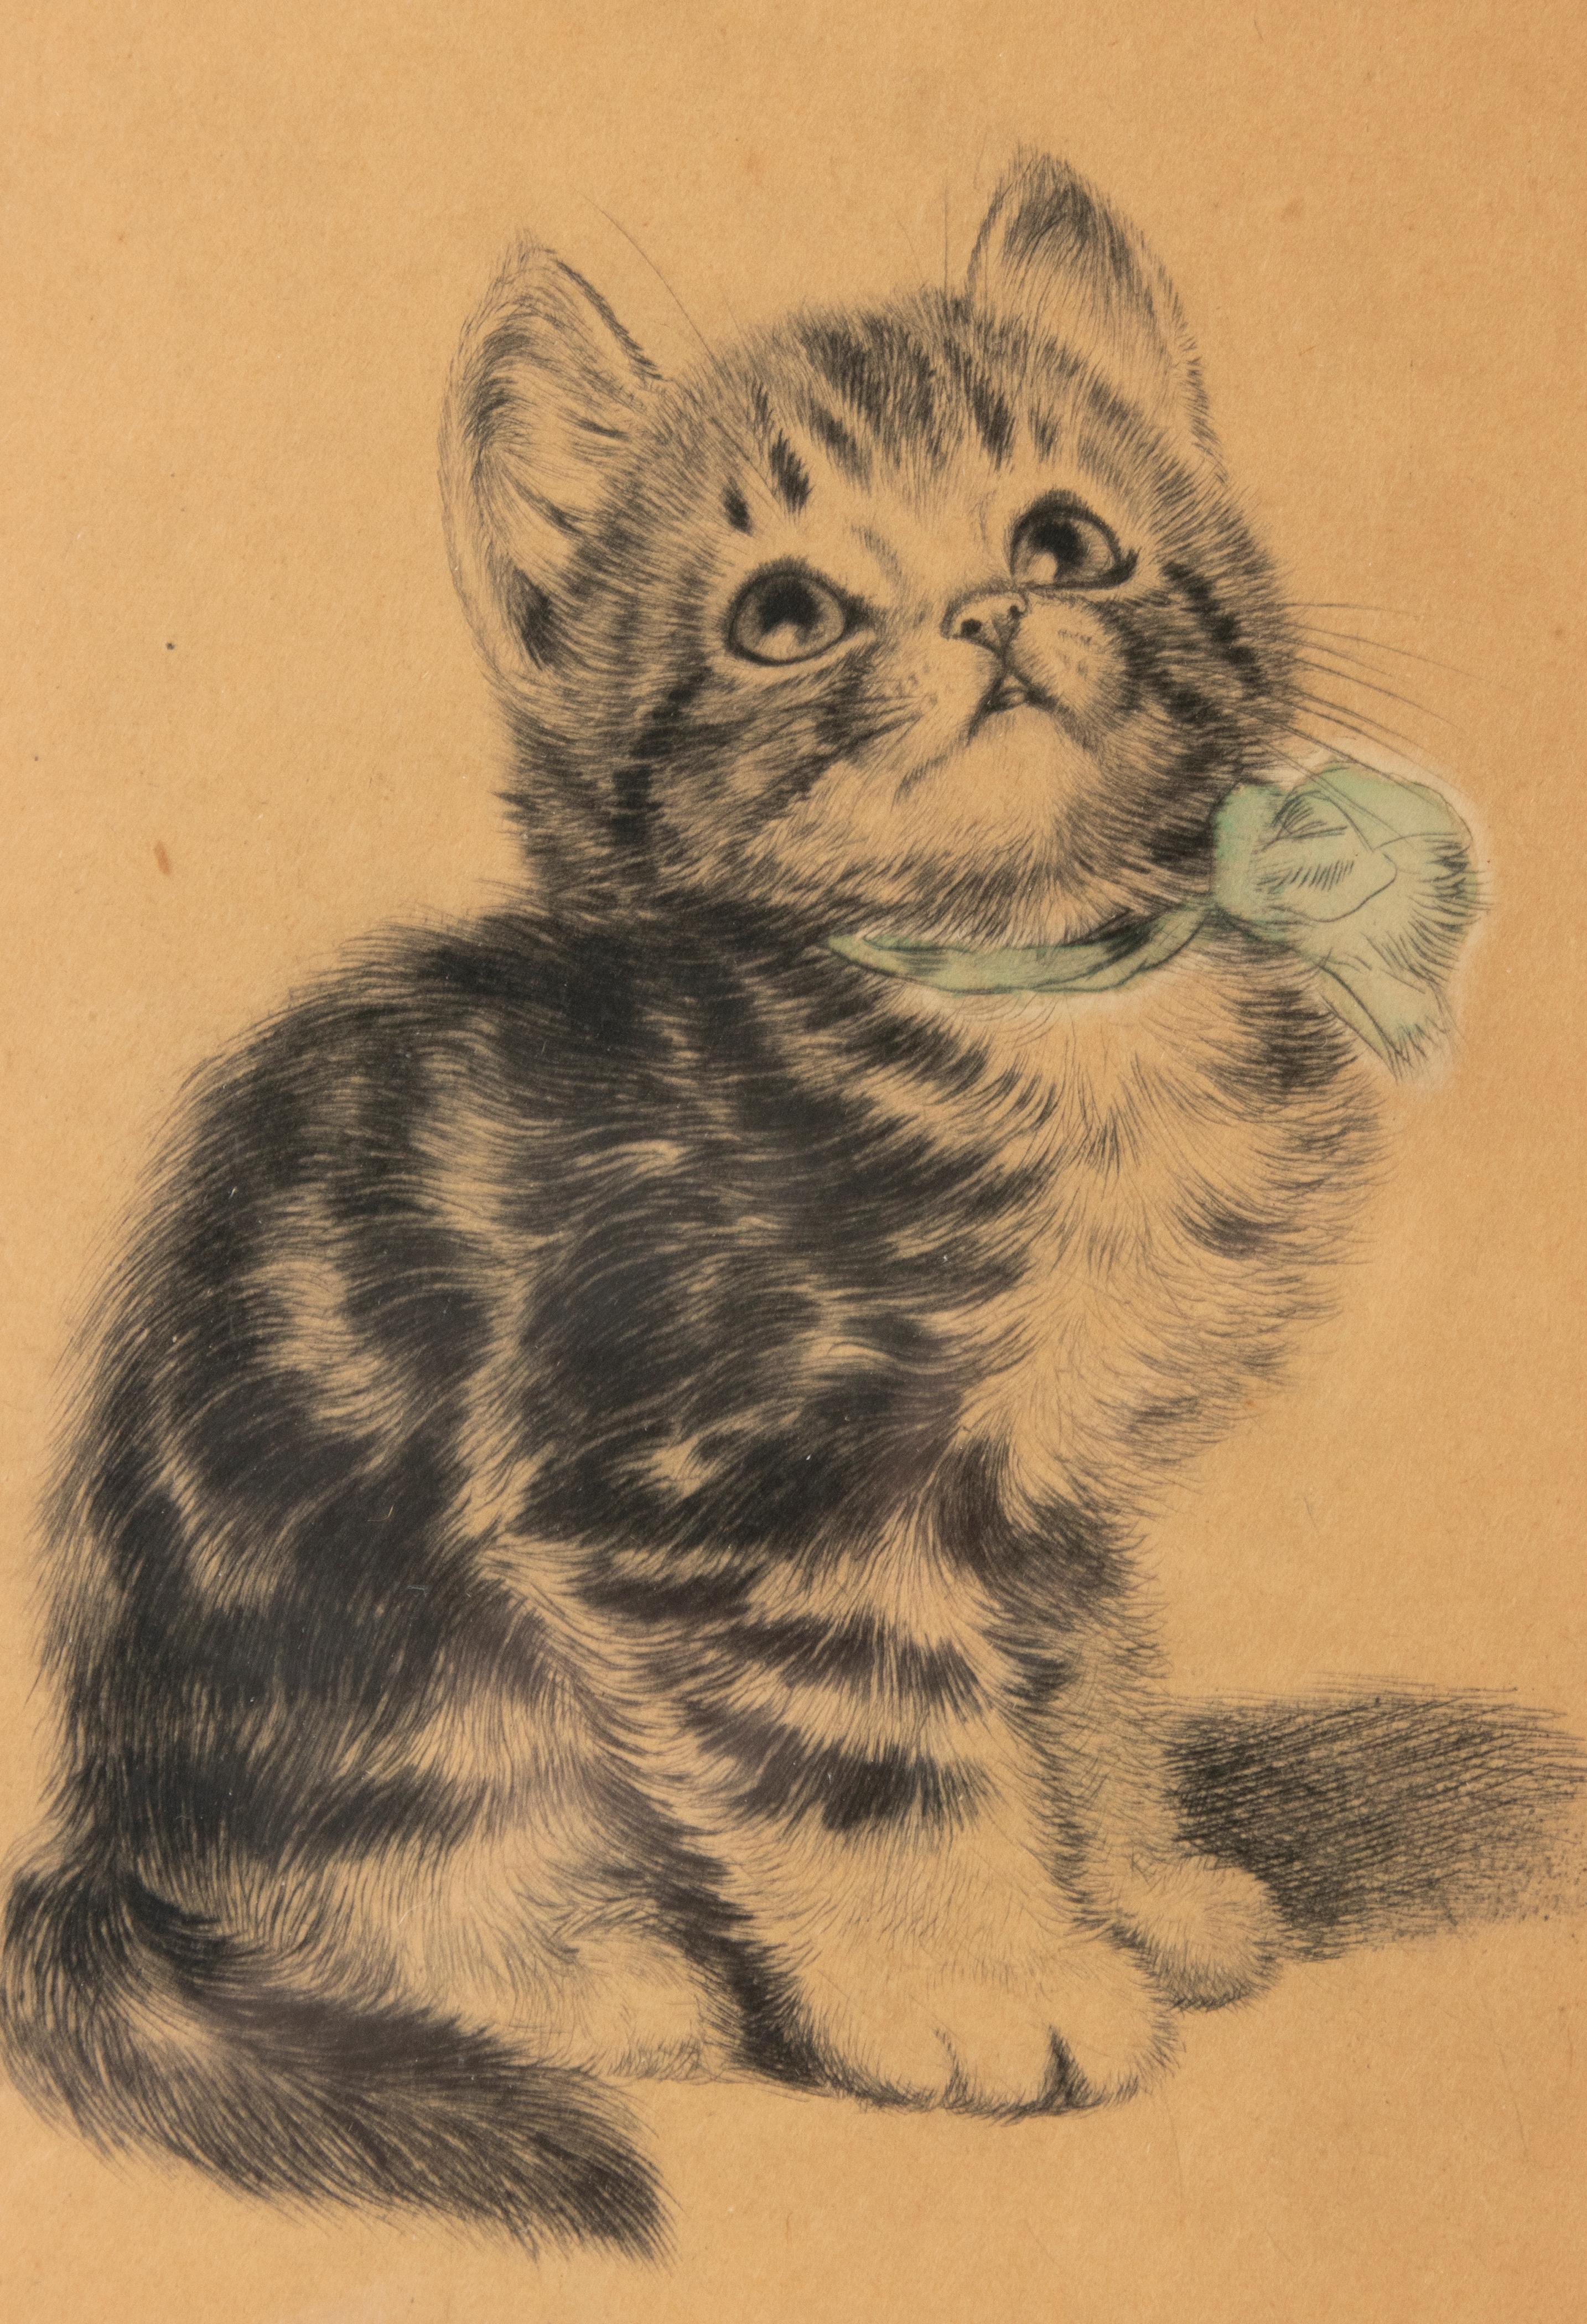 Etched Early 20th Century Lithograph Young Cat by Meta Plückebaum